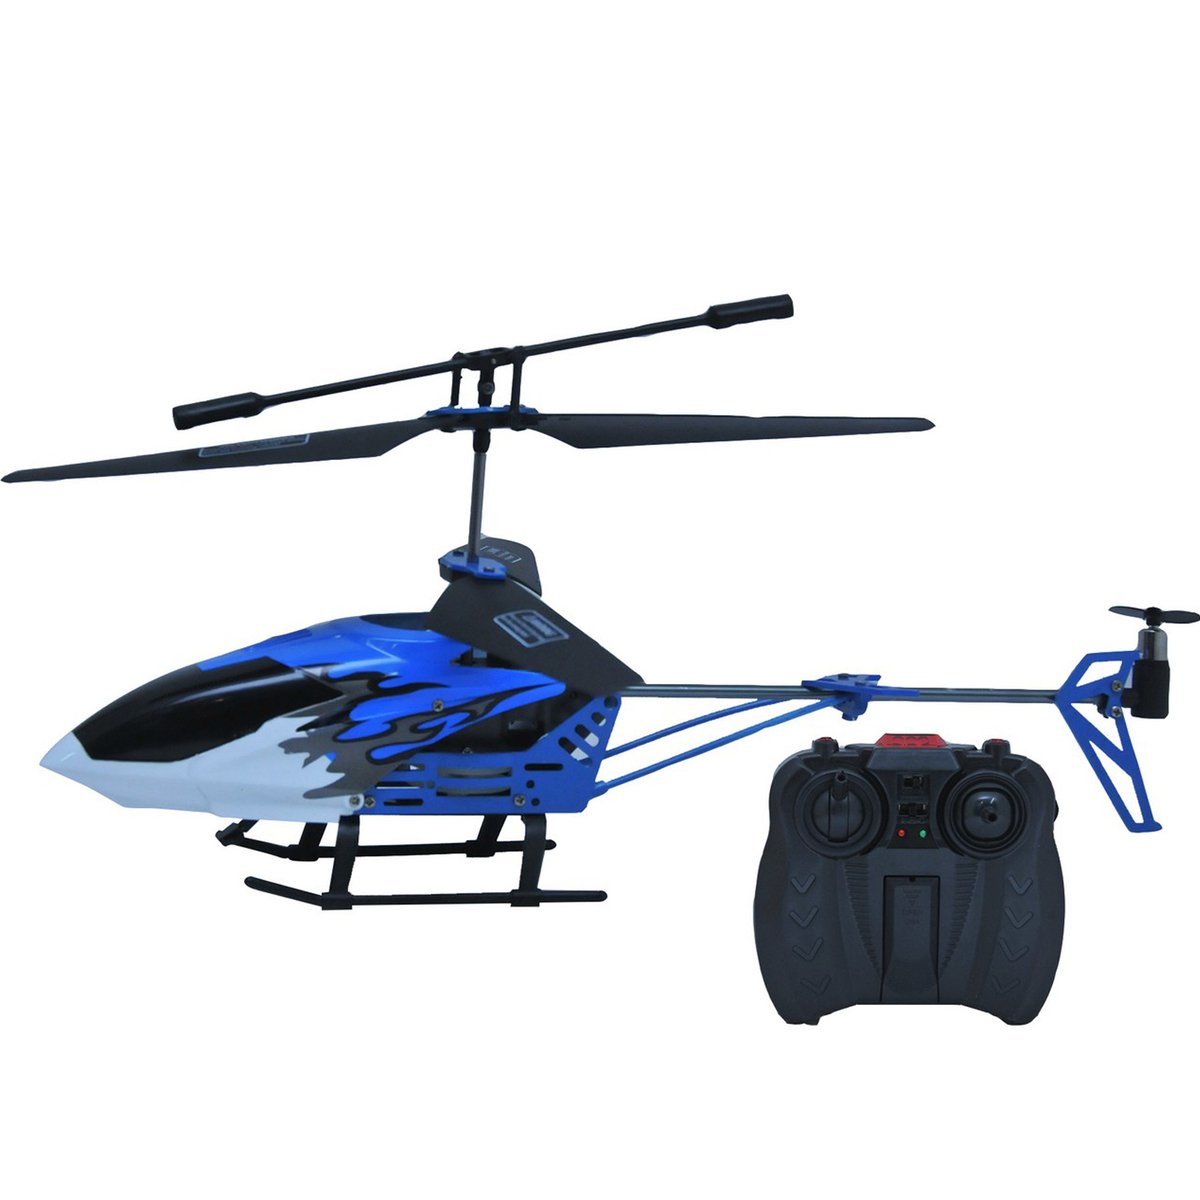 Skid Fusion Rechargeble Helicopter HK299 3.5 Channel (Color may vary)